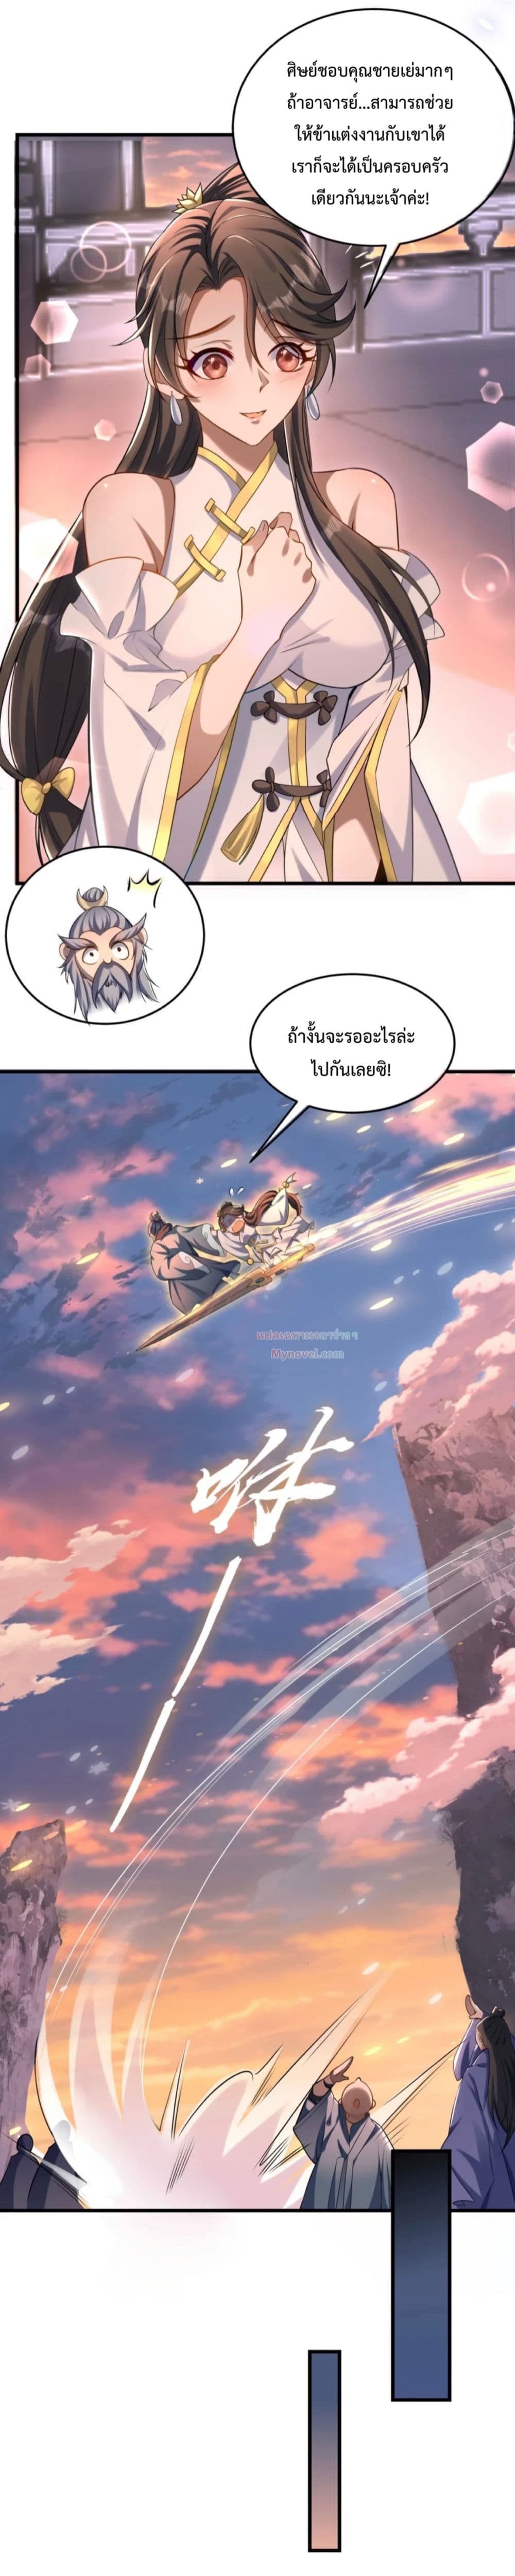 The Strongest Human in the Three Kingdoms 4-4